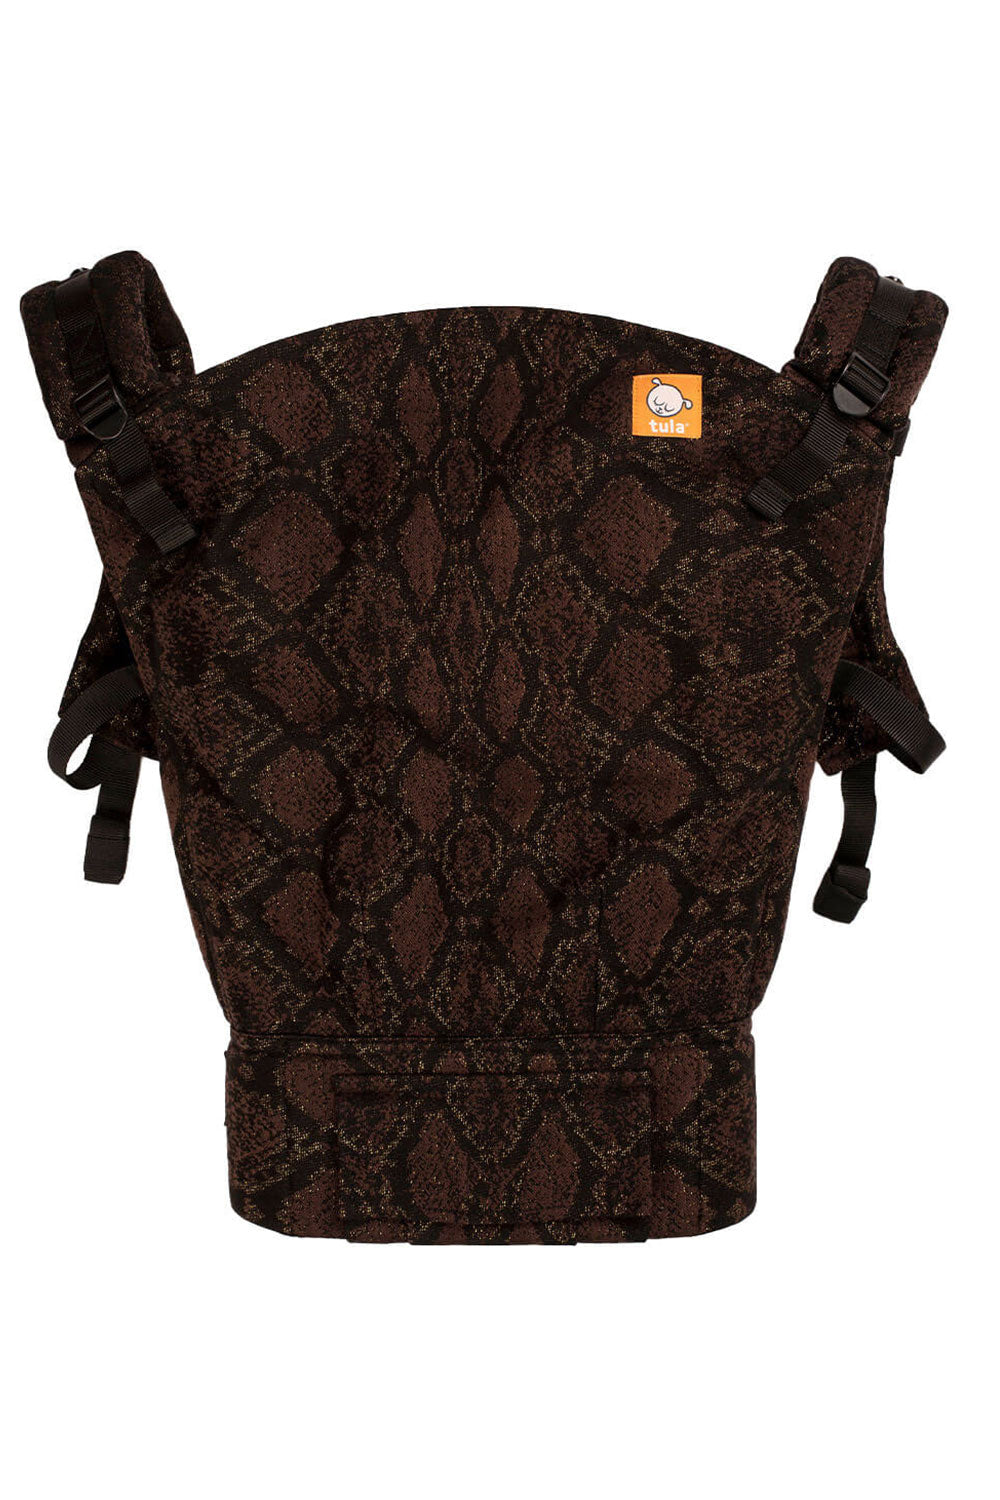 Wild Soul Blink - Signature Woven Toddler Carrier